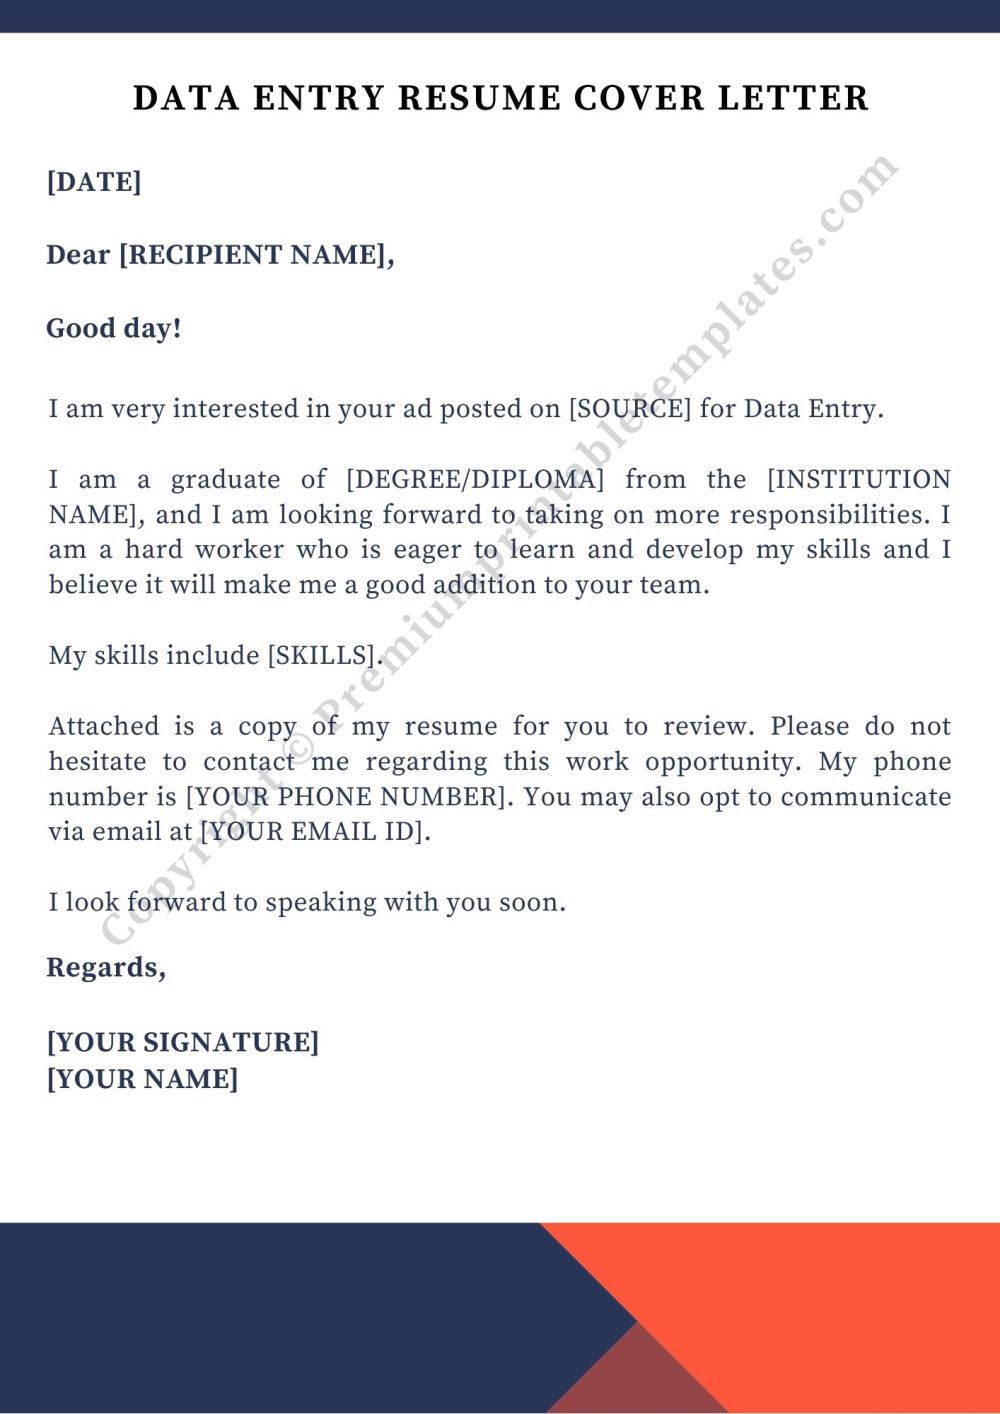 Simple Resume Cover Letter